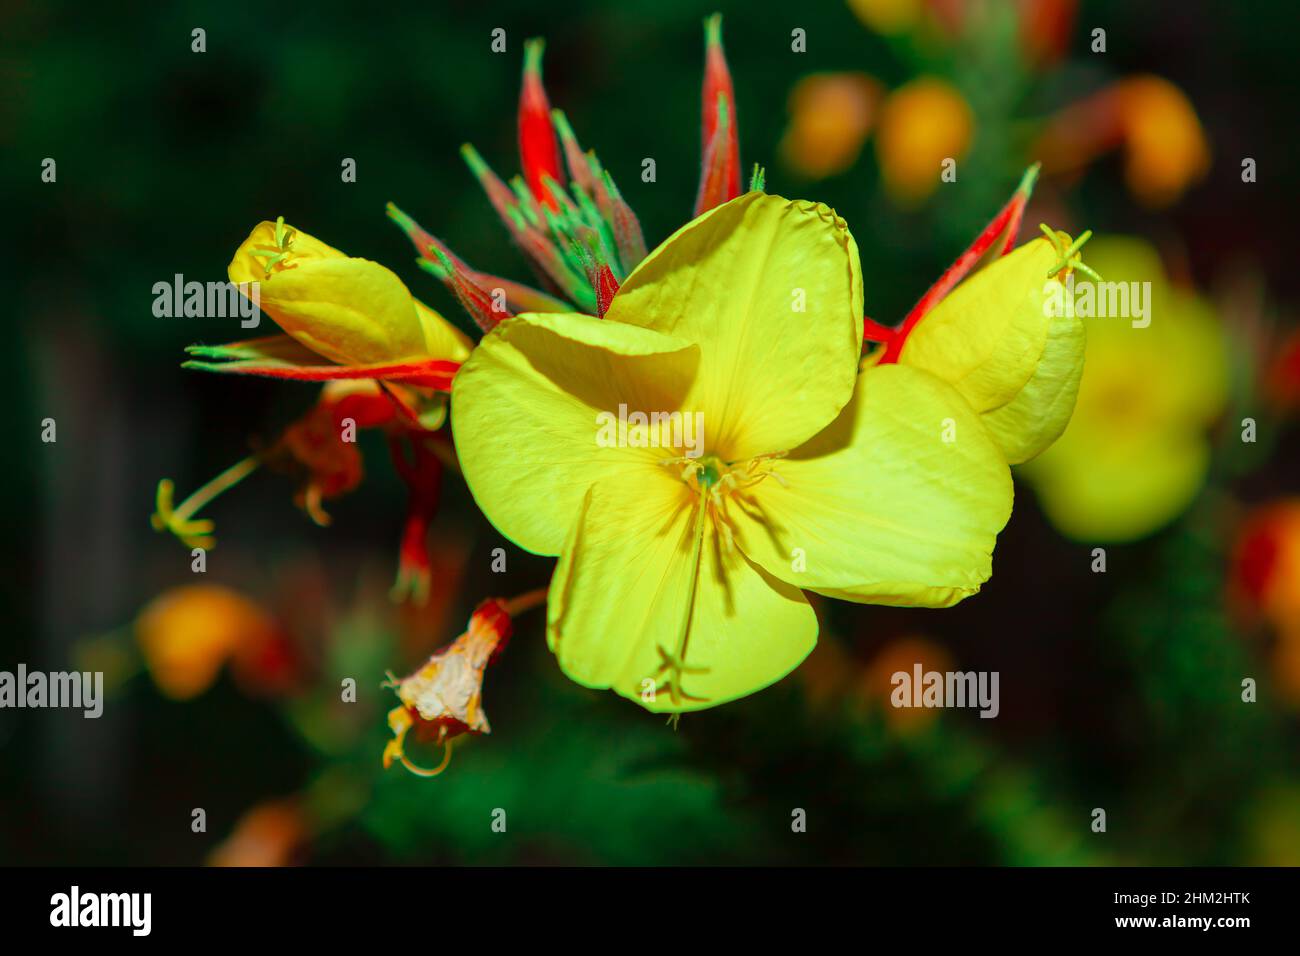 Moonlight blooming flowers . Flower with yellow spread petals Stock Photo